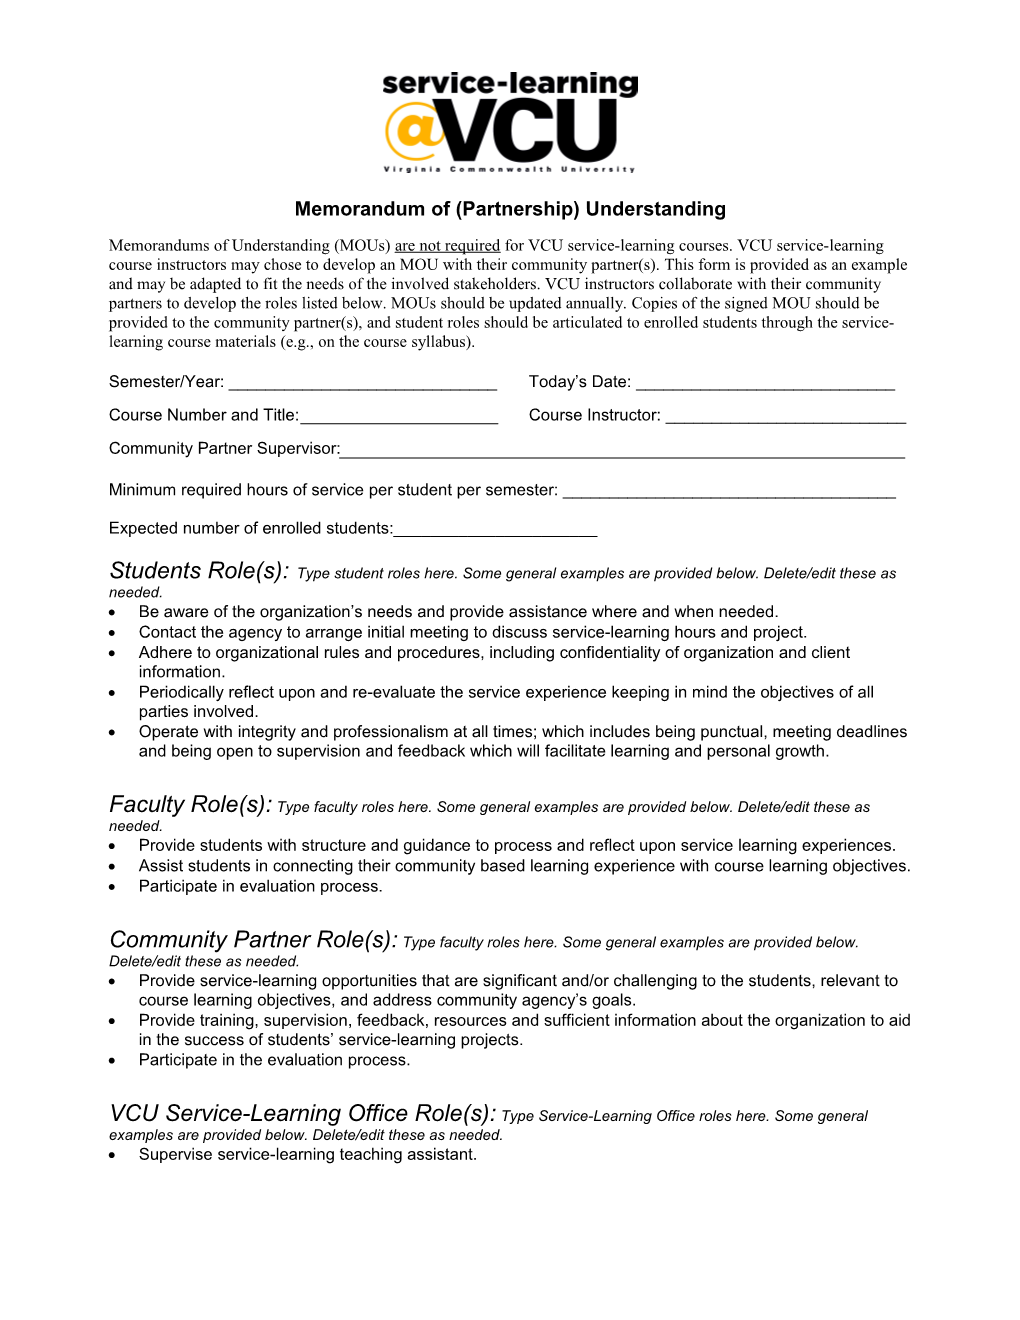 VCU Service-Learning Course MOU Template